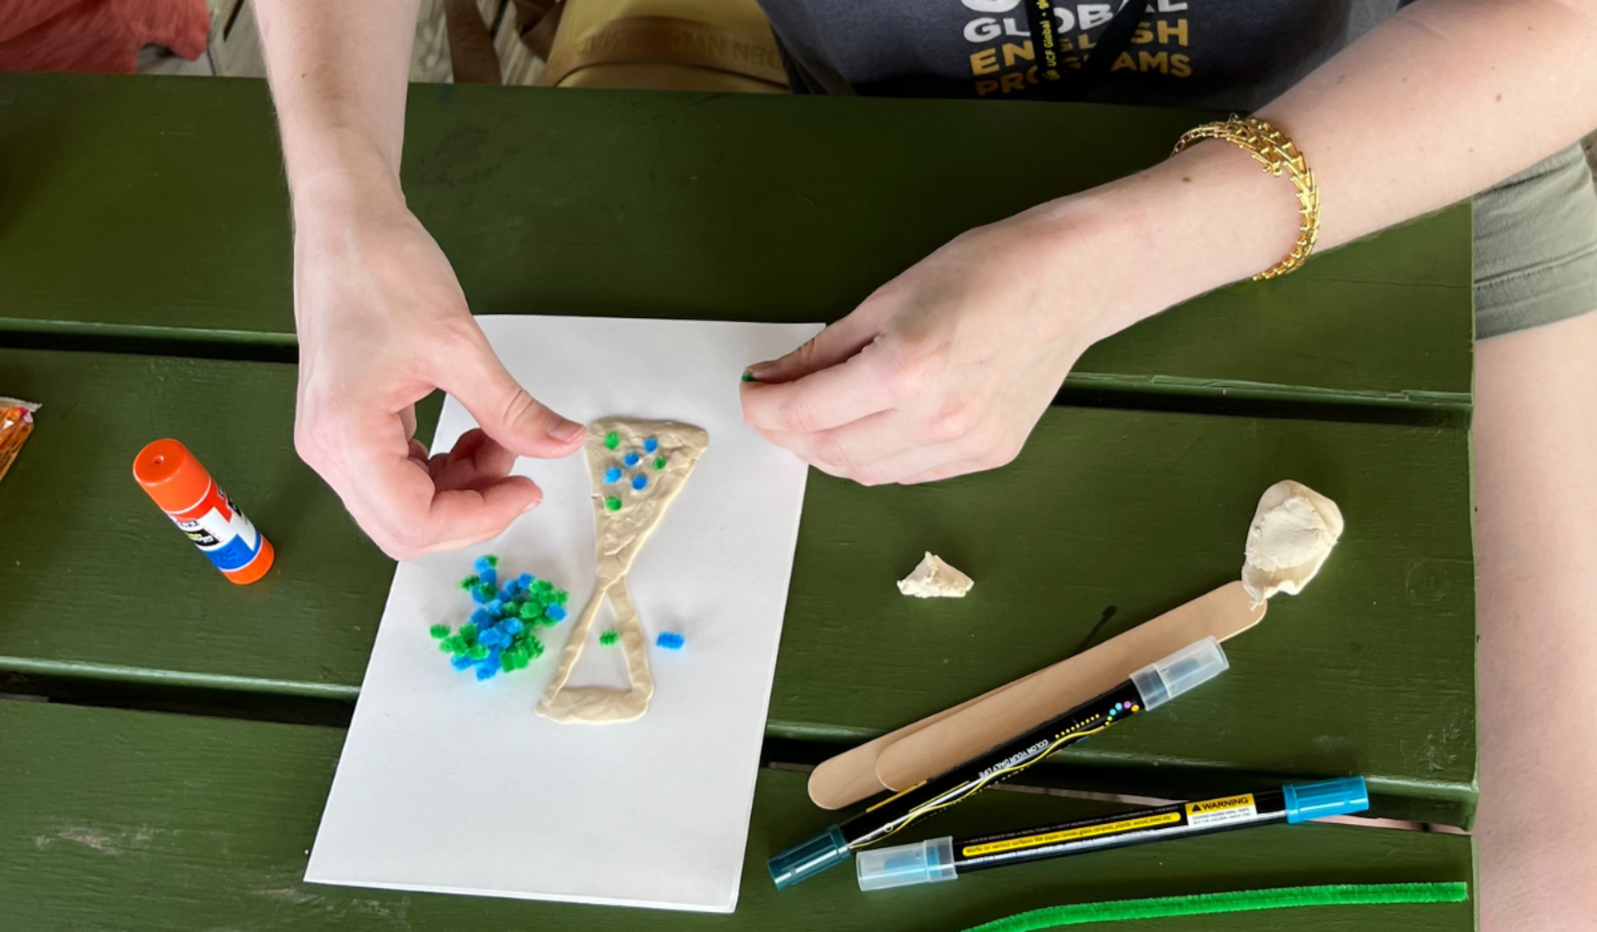 A close-up view of a student's hands placing tiny pieces of blue and green pipe cleaners into taped triangles on a piece of paper.